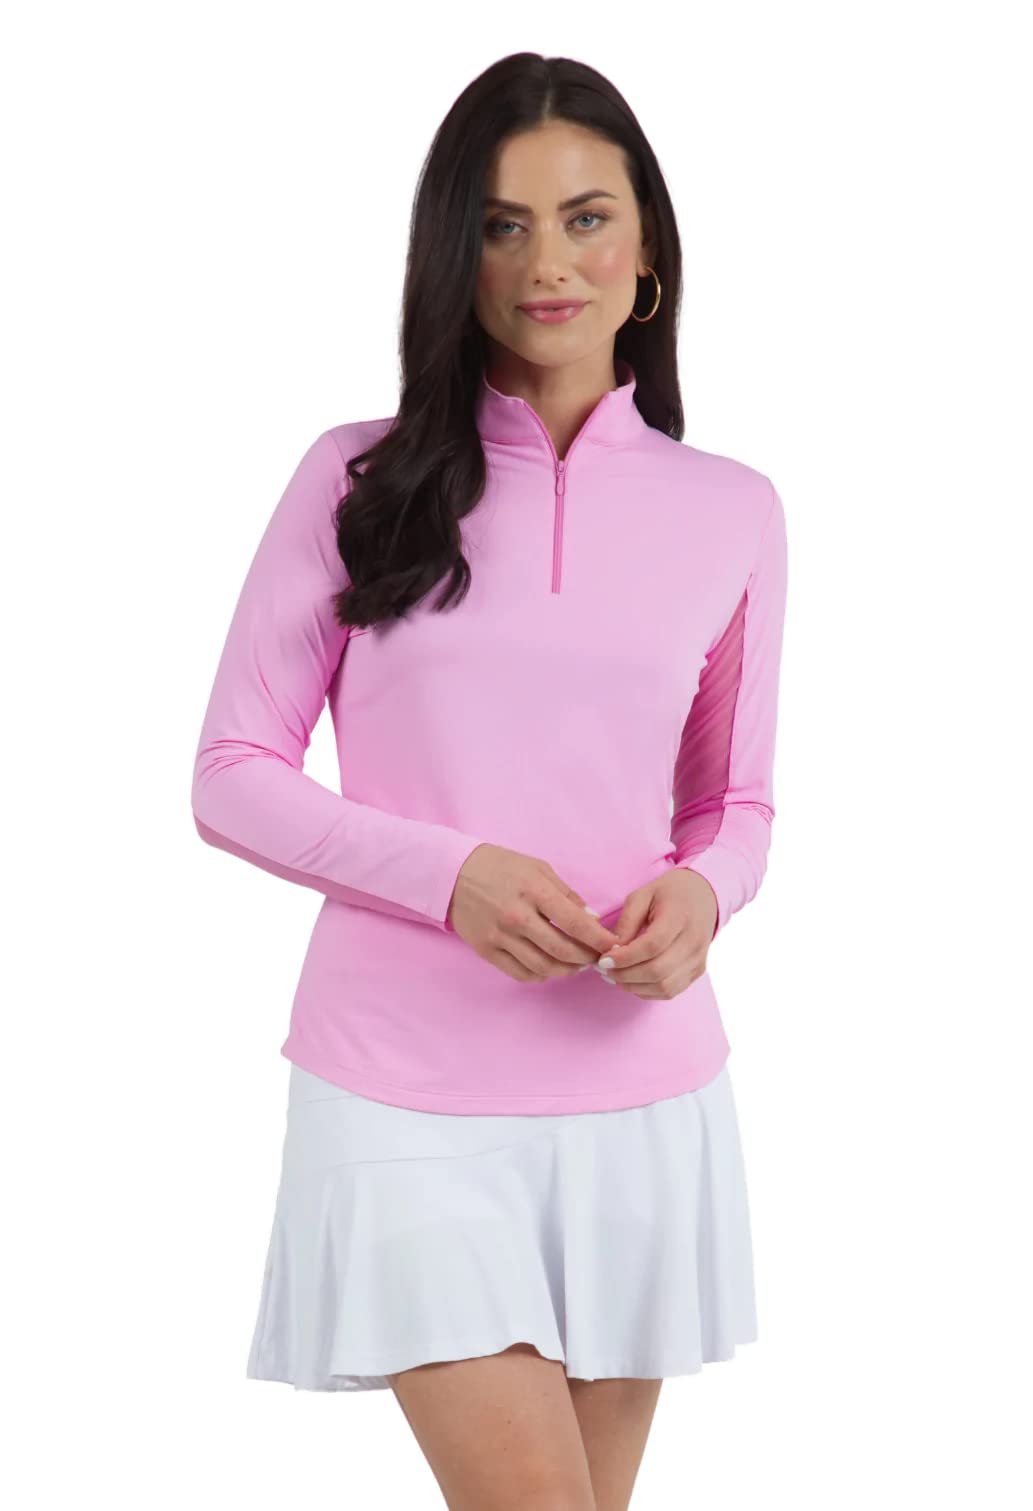 IBKUL Athleisure Wear Sun Protective UPF 50+ Icefil Cooling Tech Long Sleeve Mock Neck Top with Under Arm Mesh 80000 Jade Solid XL